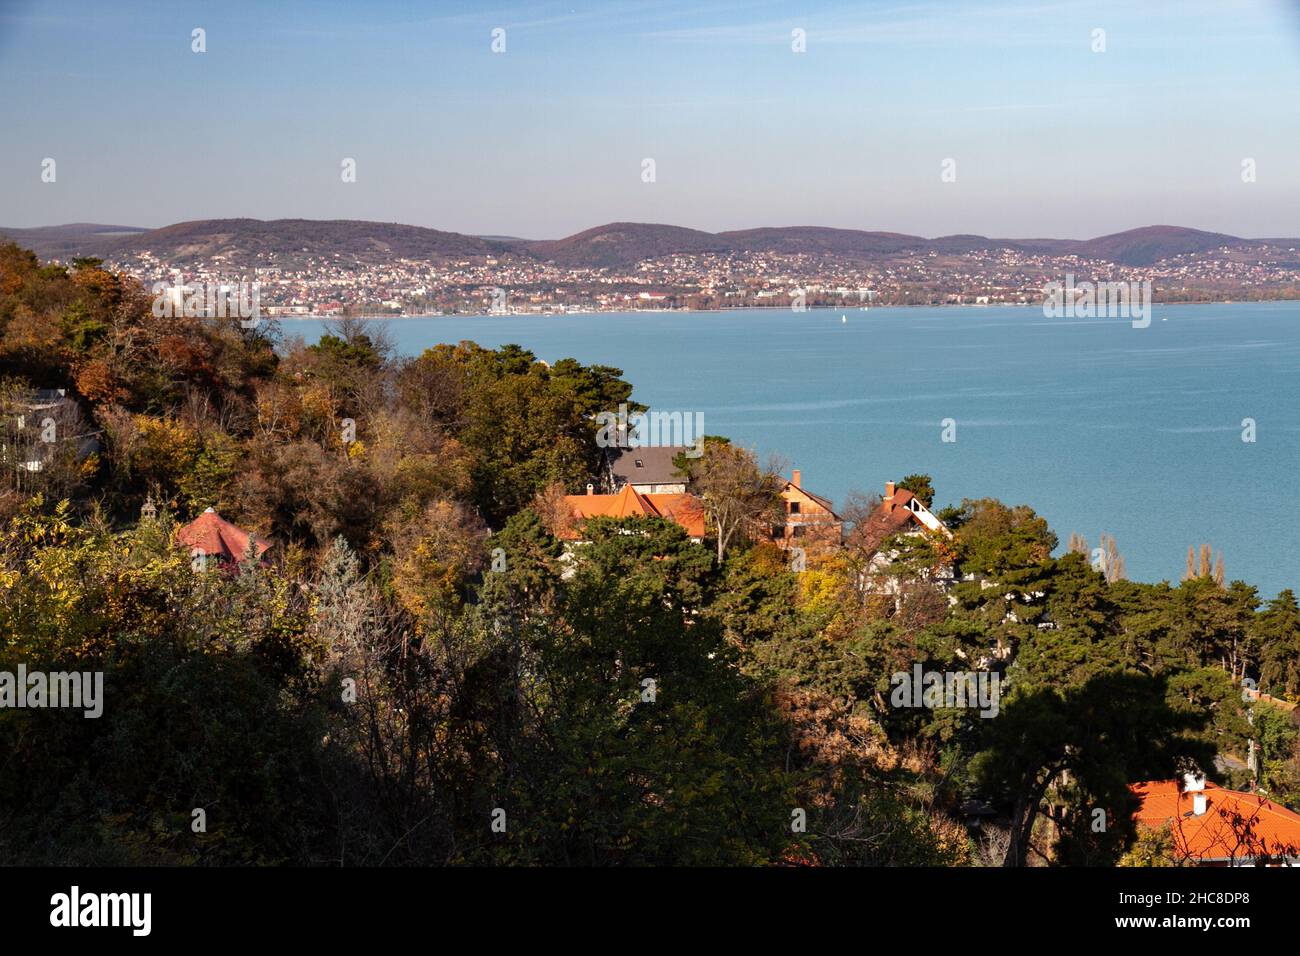 The town of Tihany (and cemetery) Lake Balaton in the background, Hungary Stock Photo